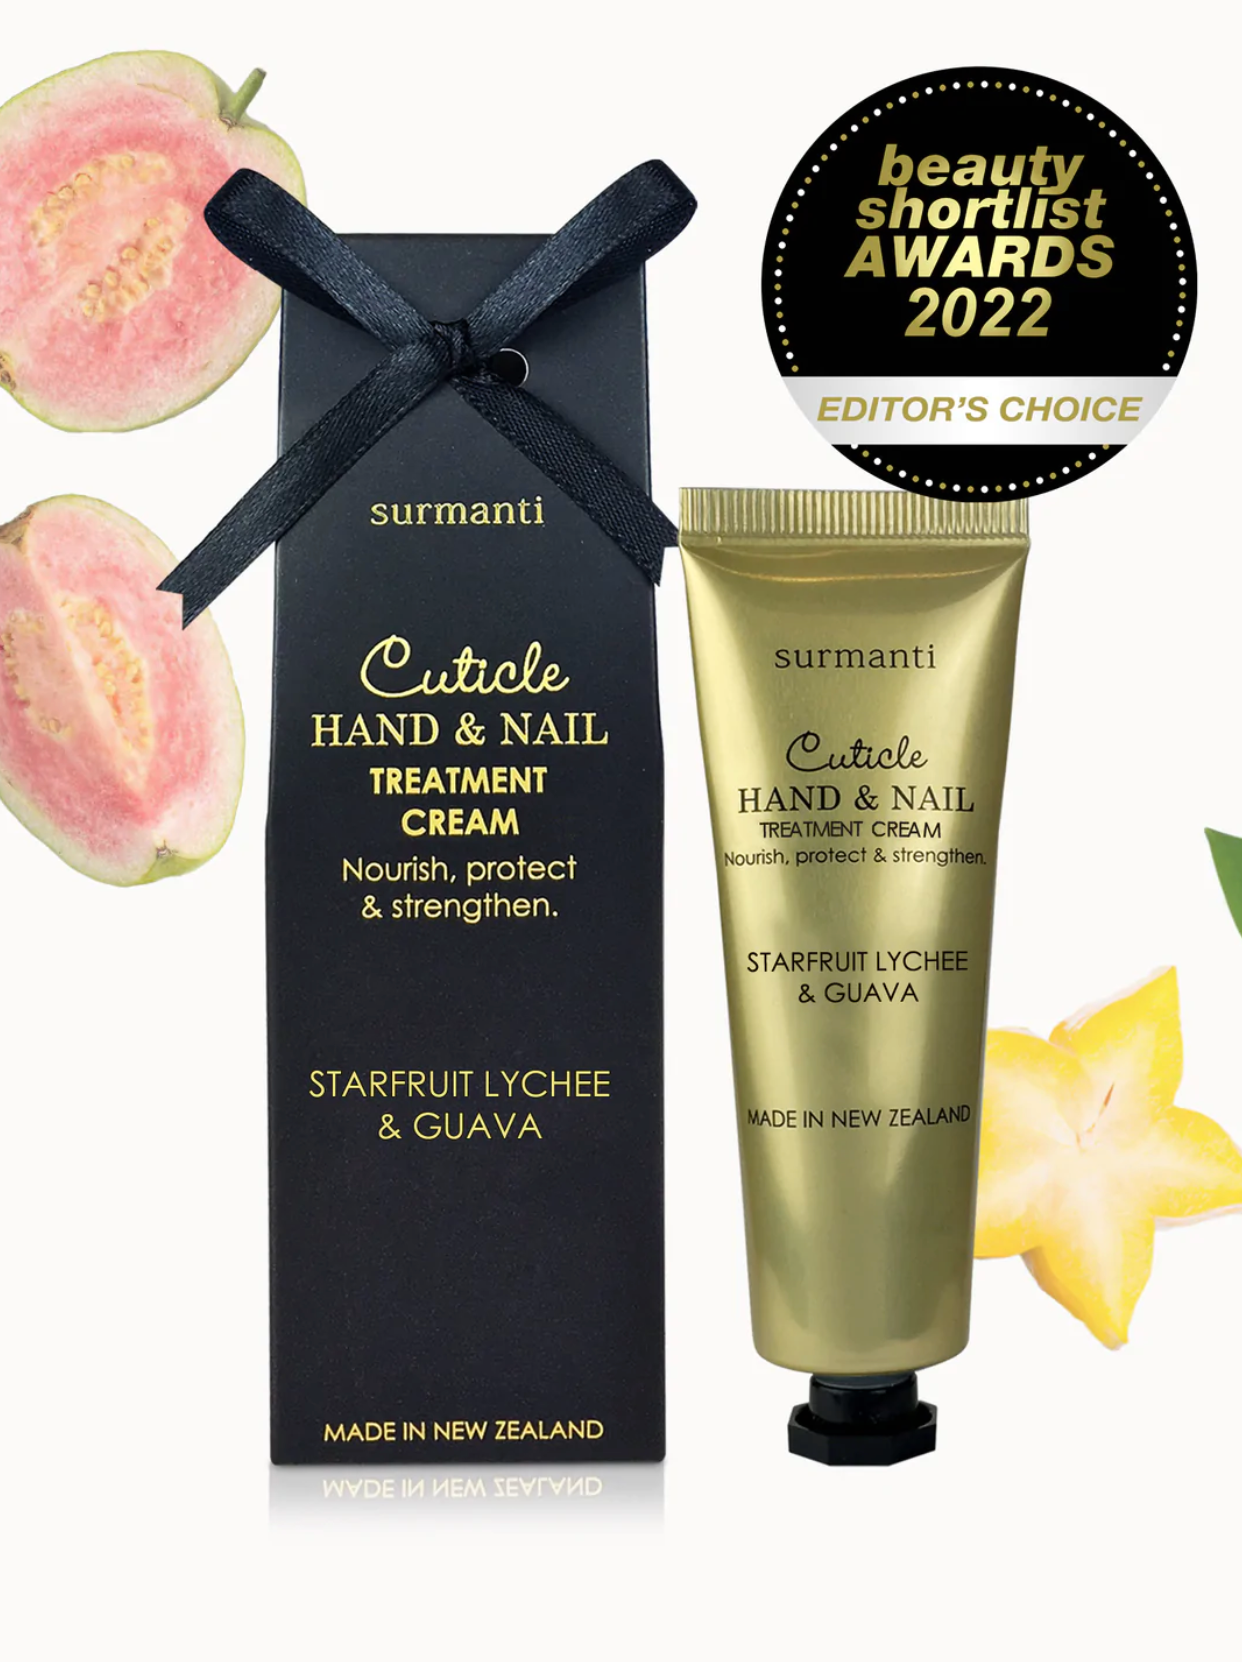 Cuticle Hand and Nail Treatment Cream - Starfruit Lychee and Guava